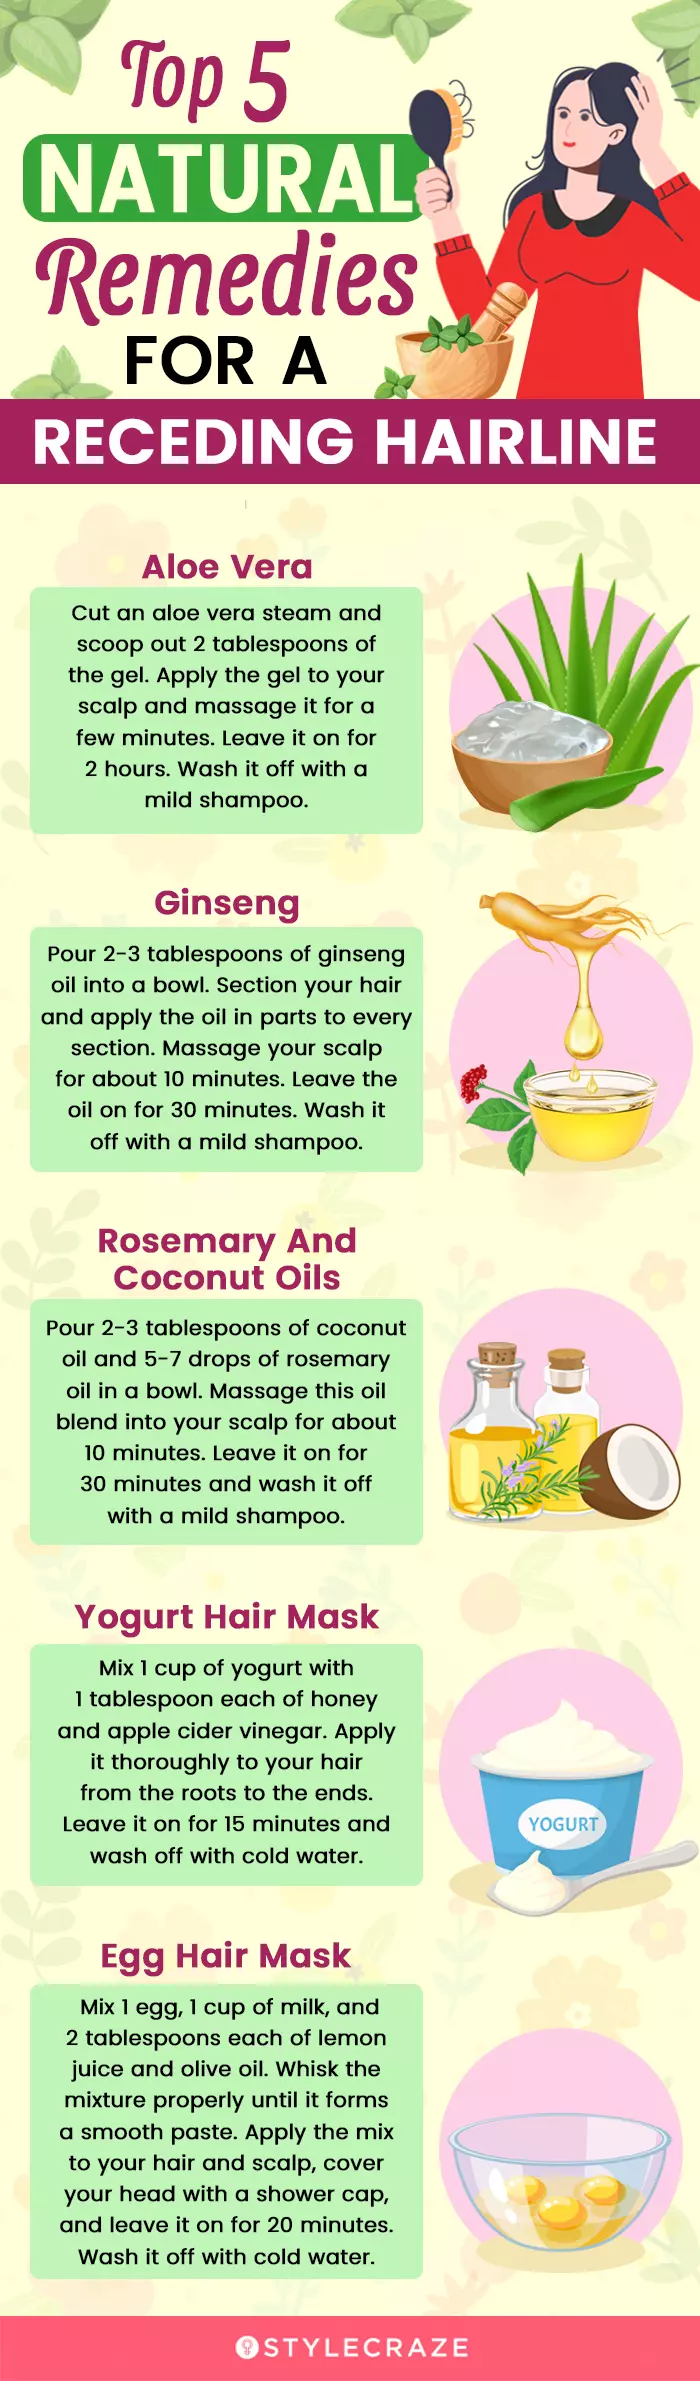 top 5 natural remedies for a receding hairline (infographic)